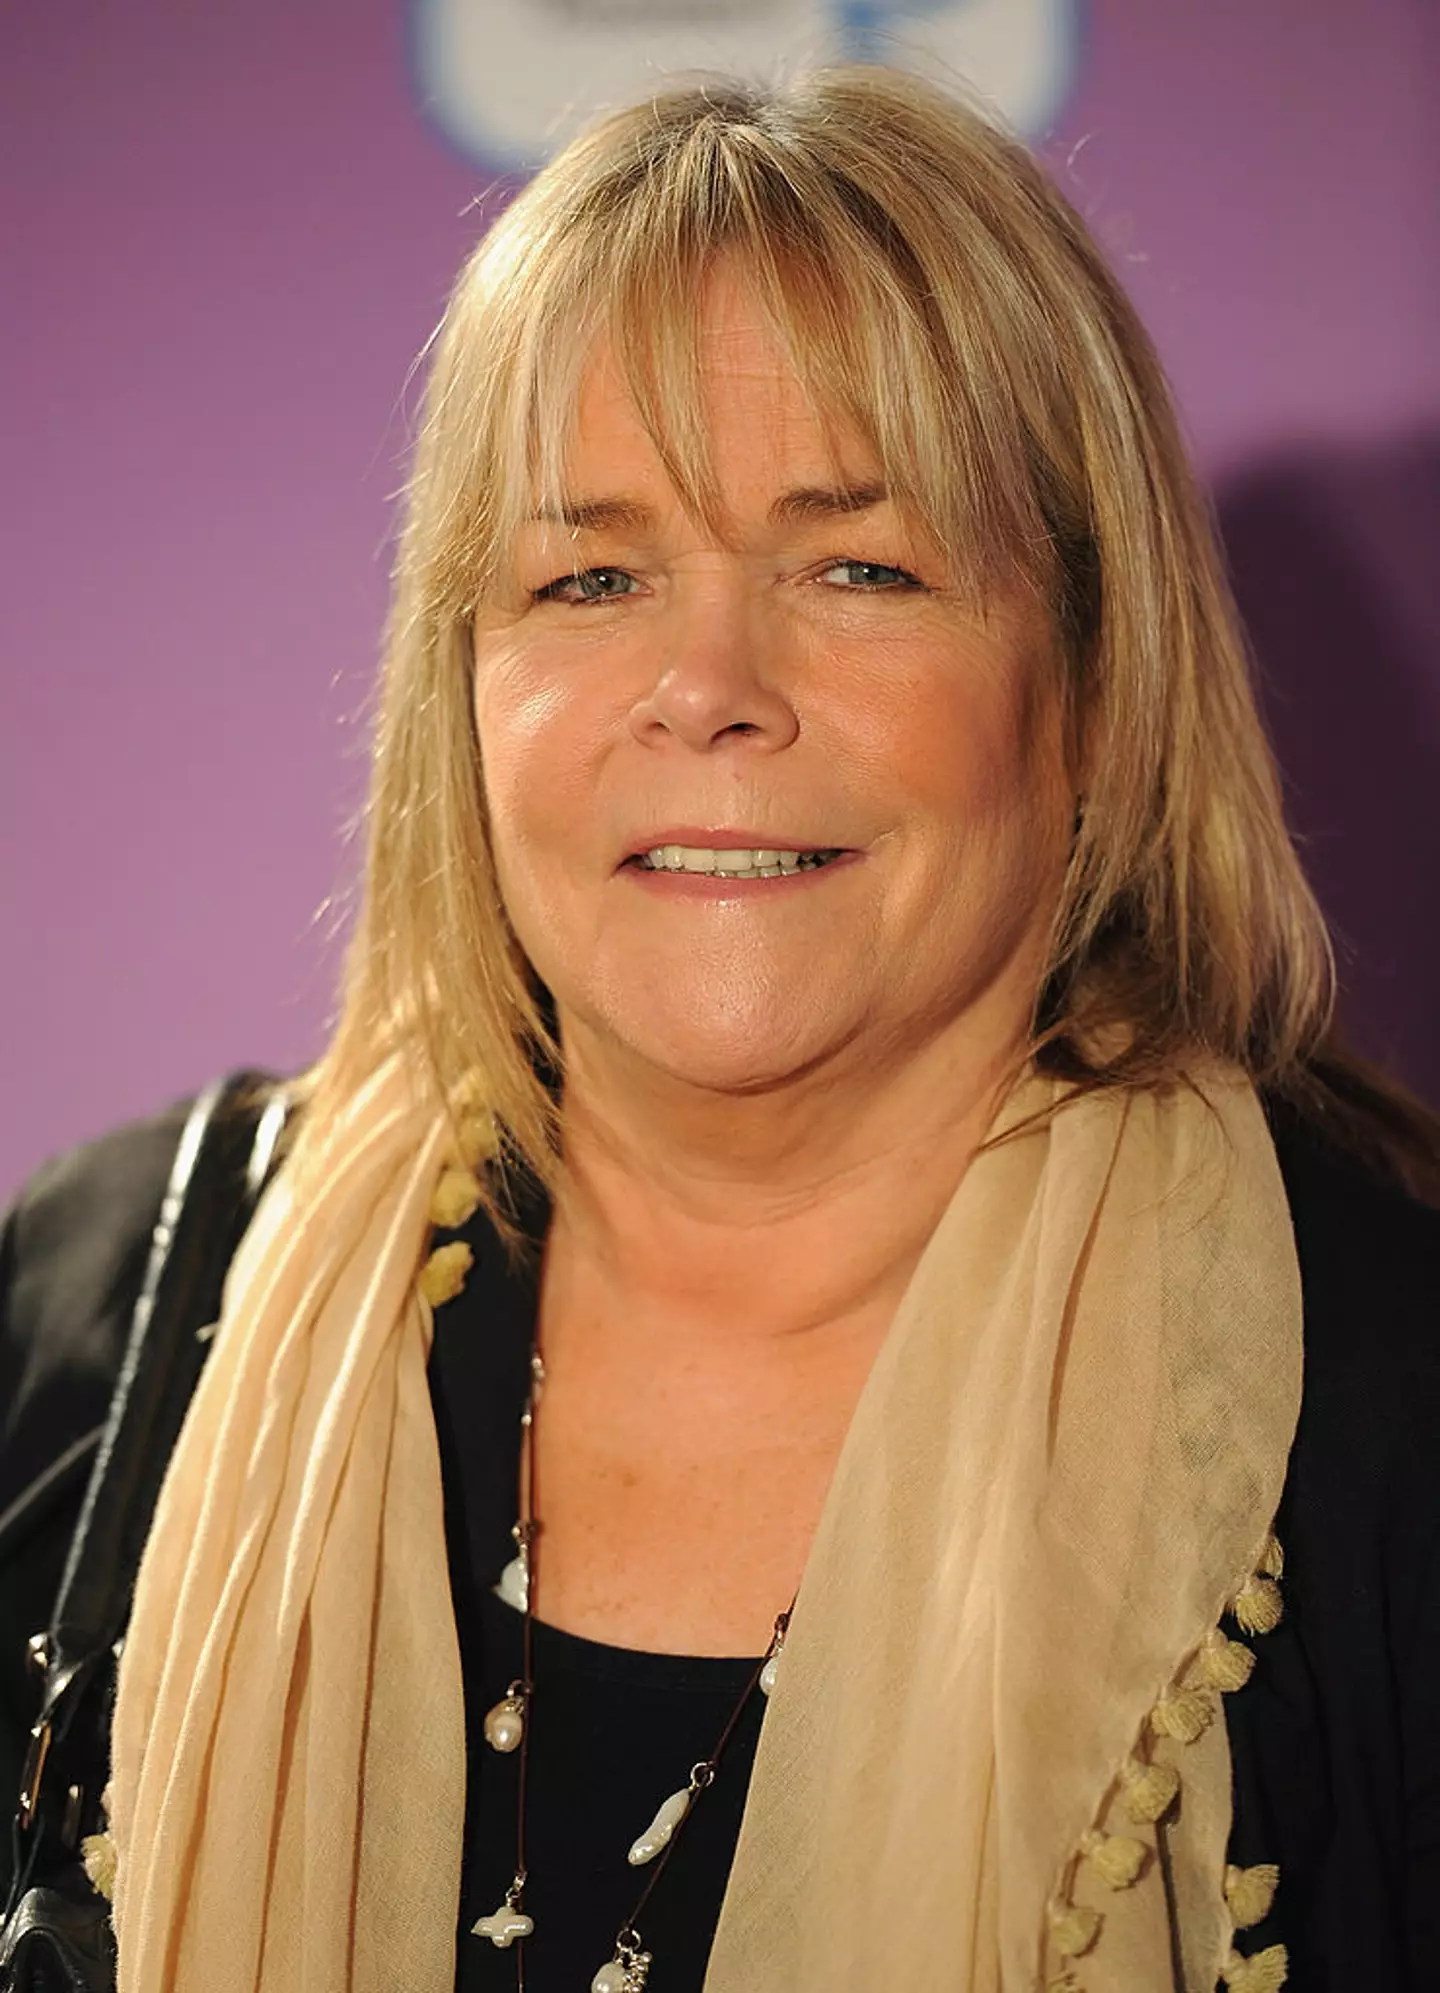 Turns out Linda Robson is a bit of a menace on the road. (Ian Gavan/Getty Images)